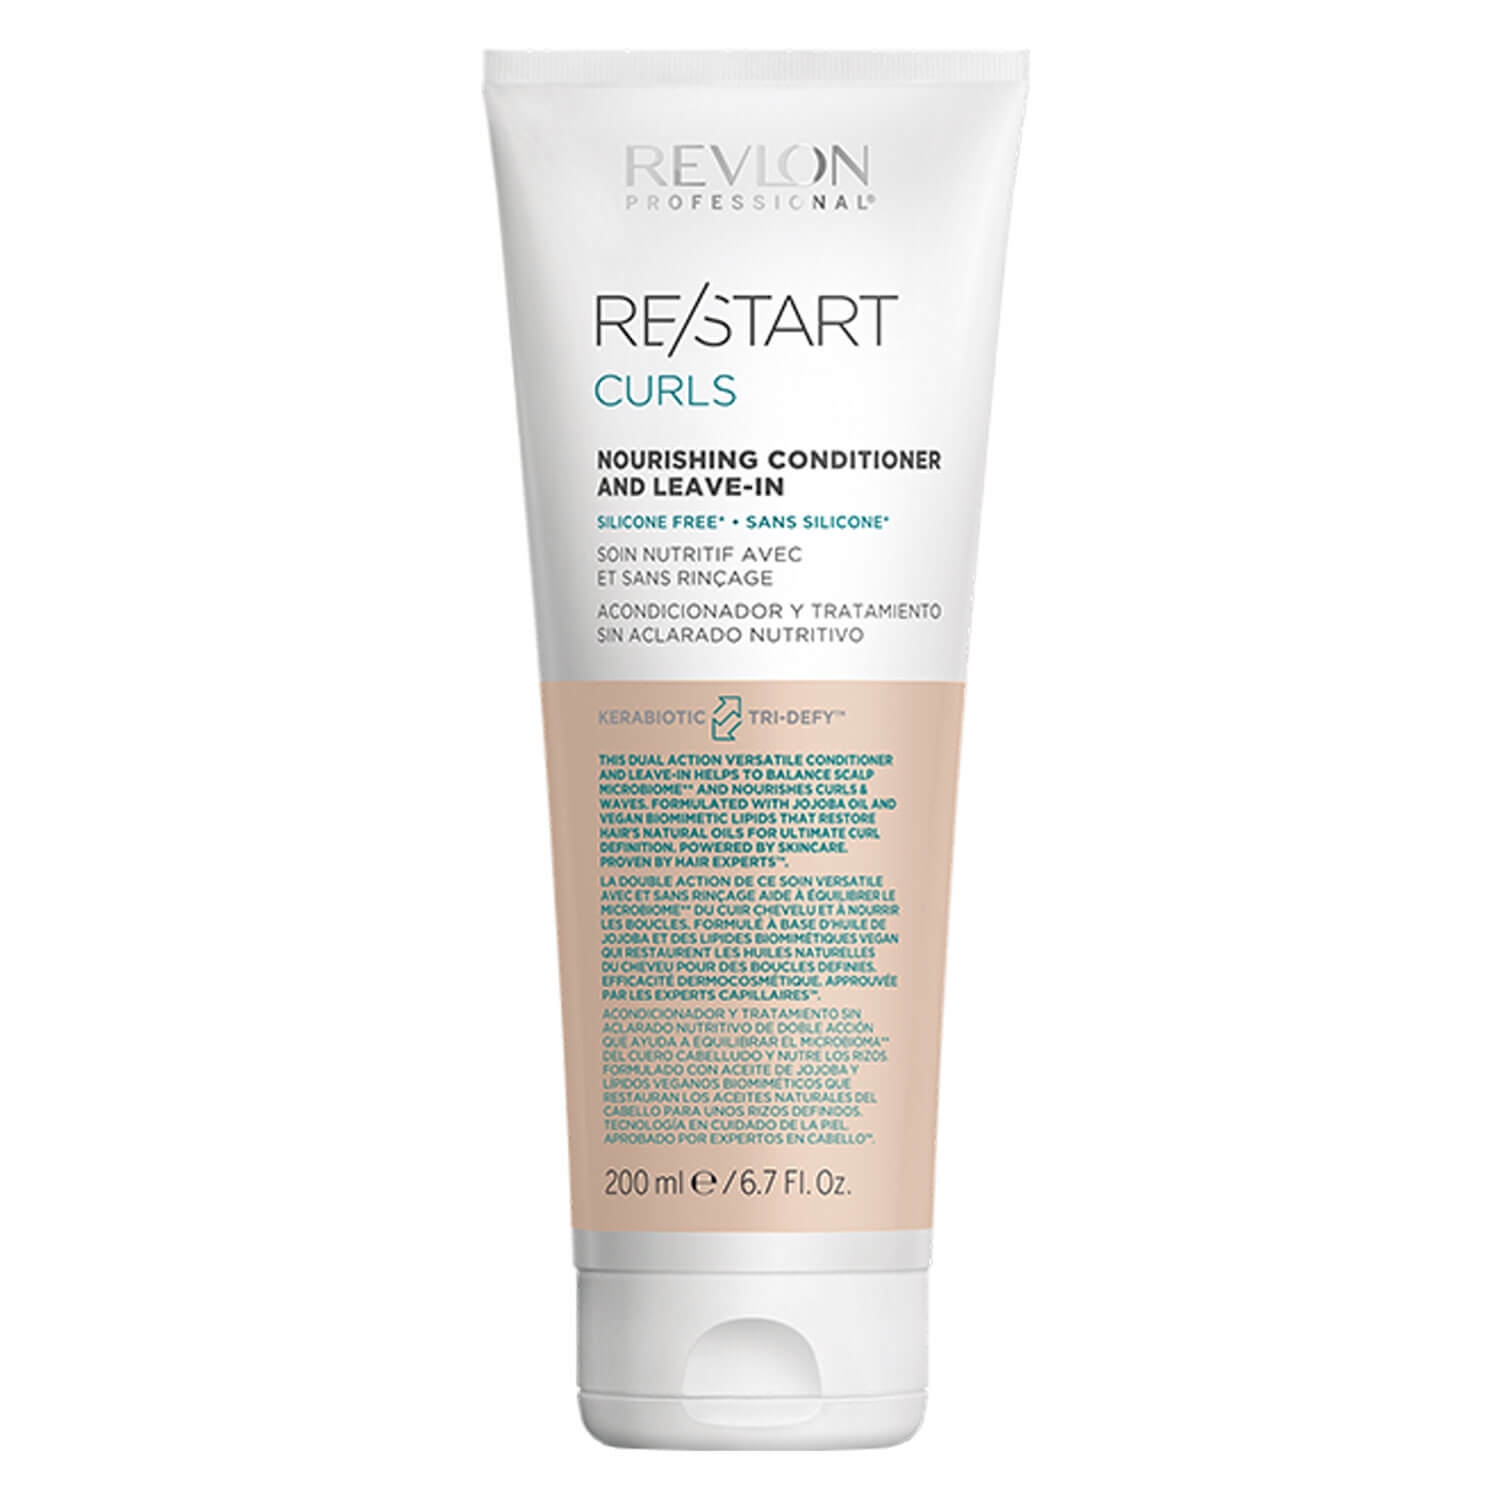 Product image from RE/START CURLS - Nourishing Conditioner and Leave-in